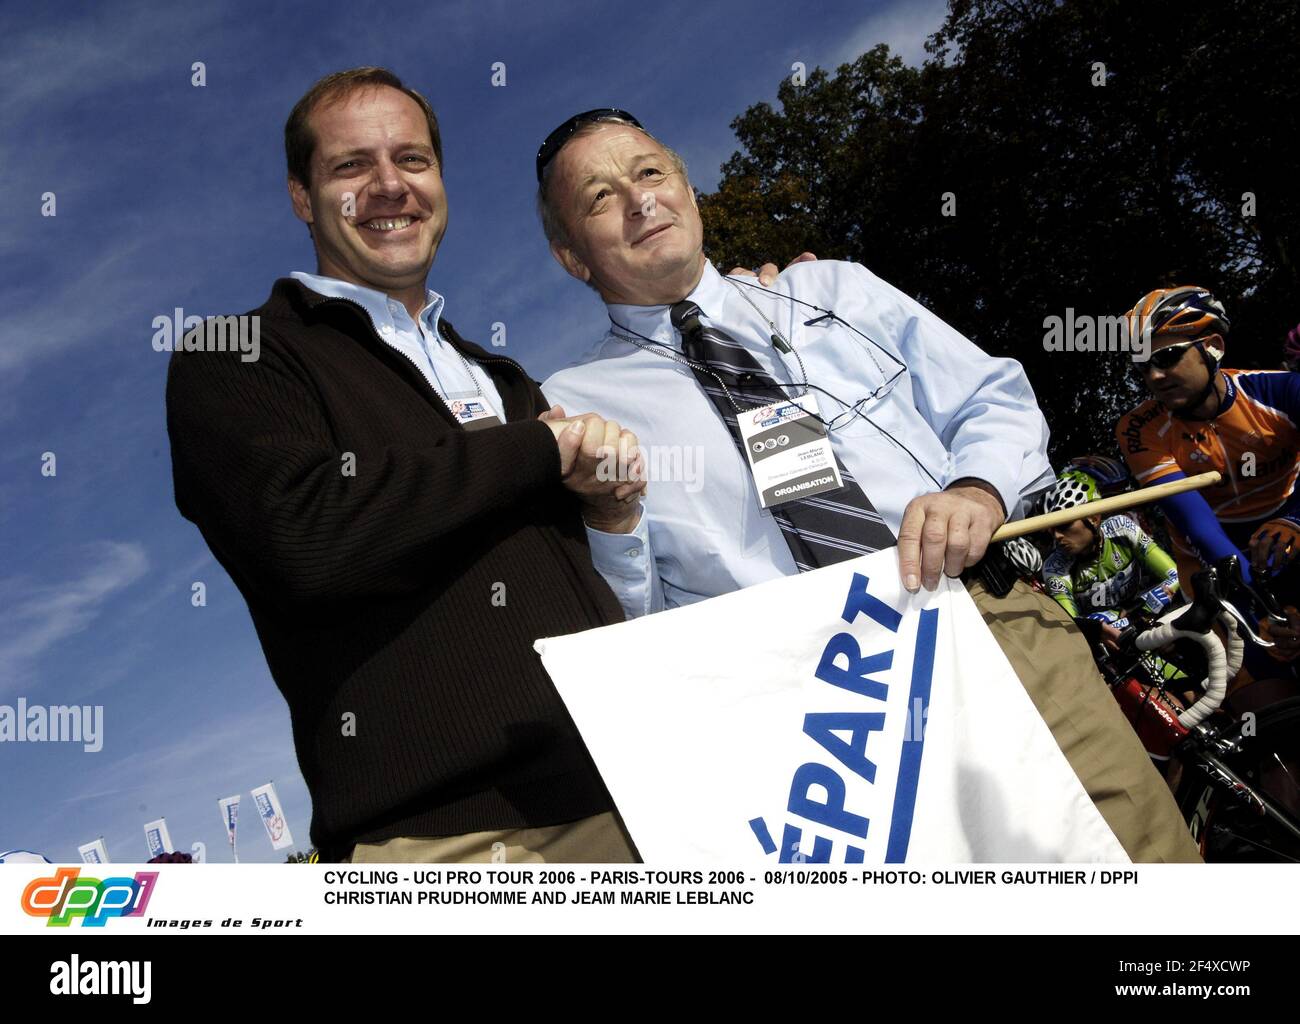 CYCLING - UCI PRO TOUR 2006 - PARIS-TOURS 2006 - 08/10/2005 - PHOTO: OLIVIER GAUTHIER / DPPI CHRISTIAN PRUDHOMME AND JEAM MARIE LEBLANC Stock Photo